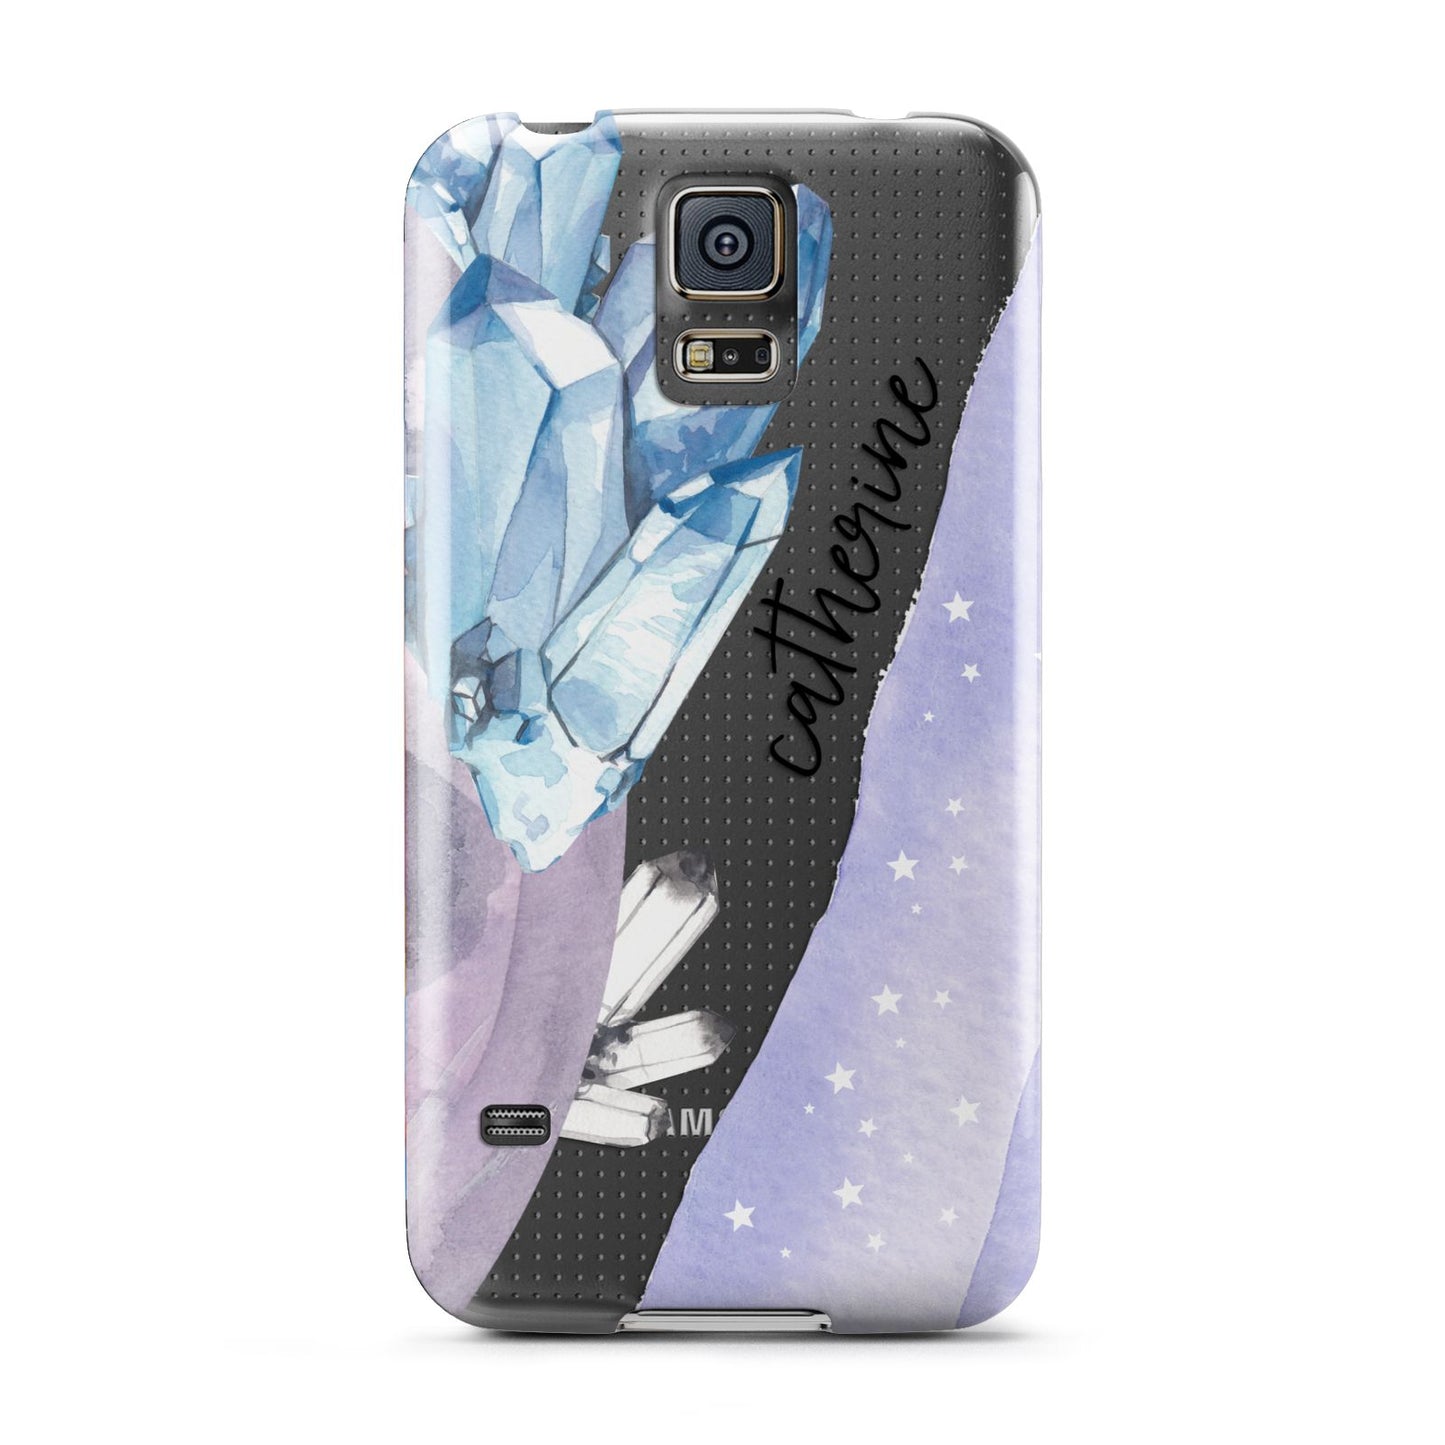 Crystals Personalised Name Samsung Galaxy S5 Case